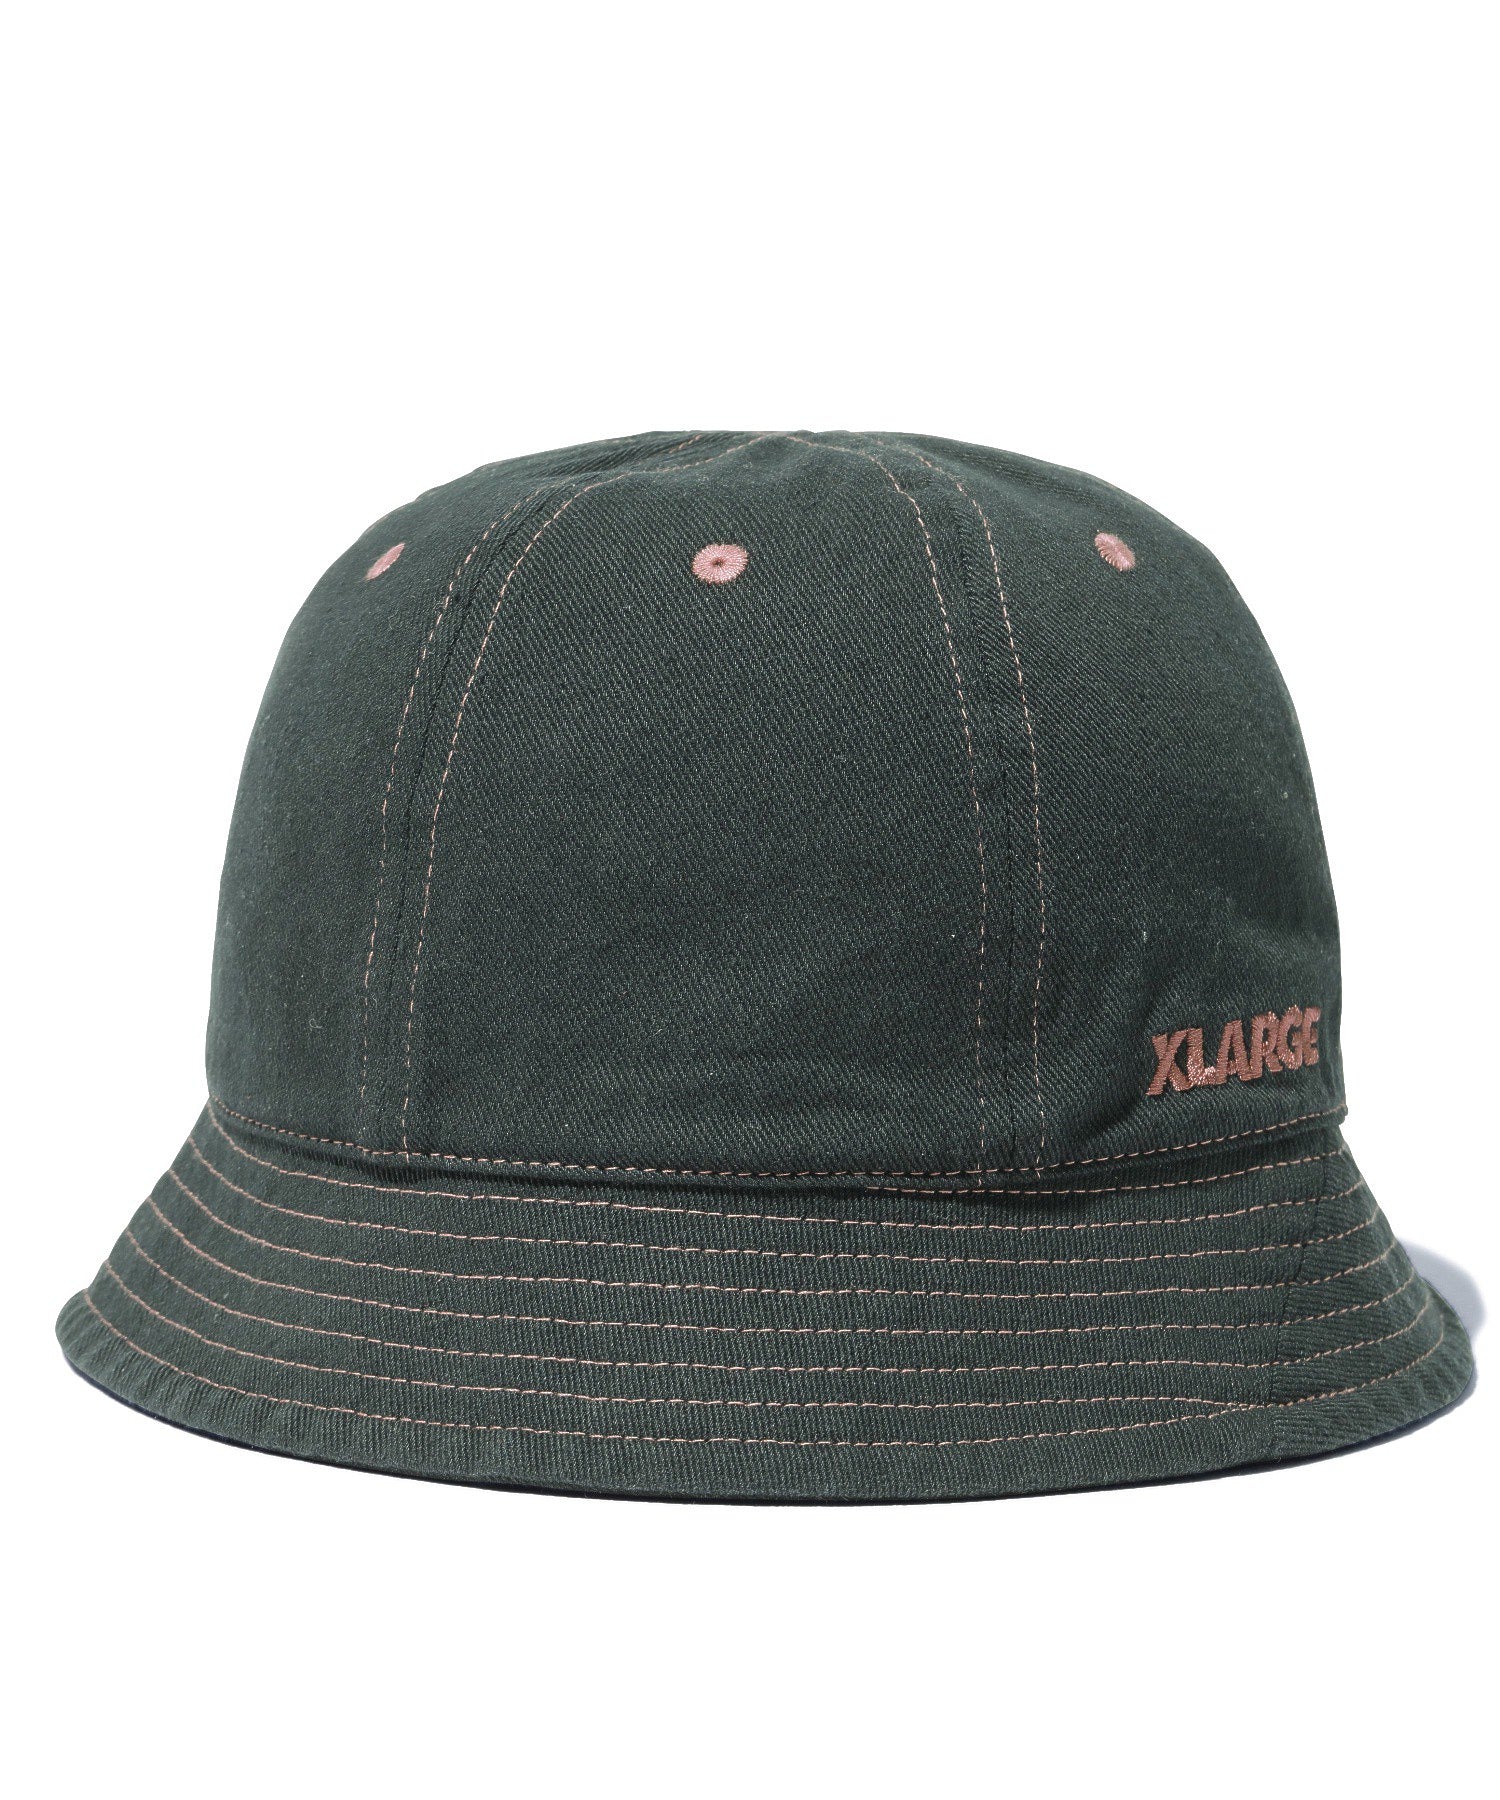 CONTRAST STITCHED BALL HAT XLARGE